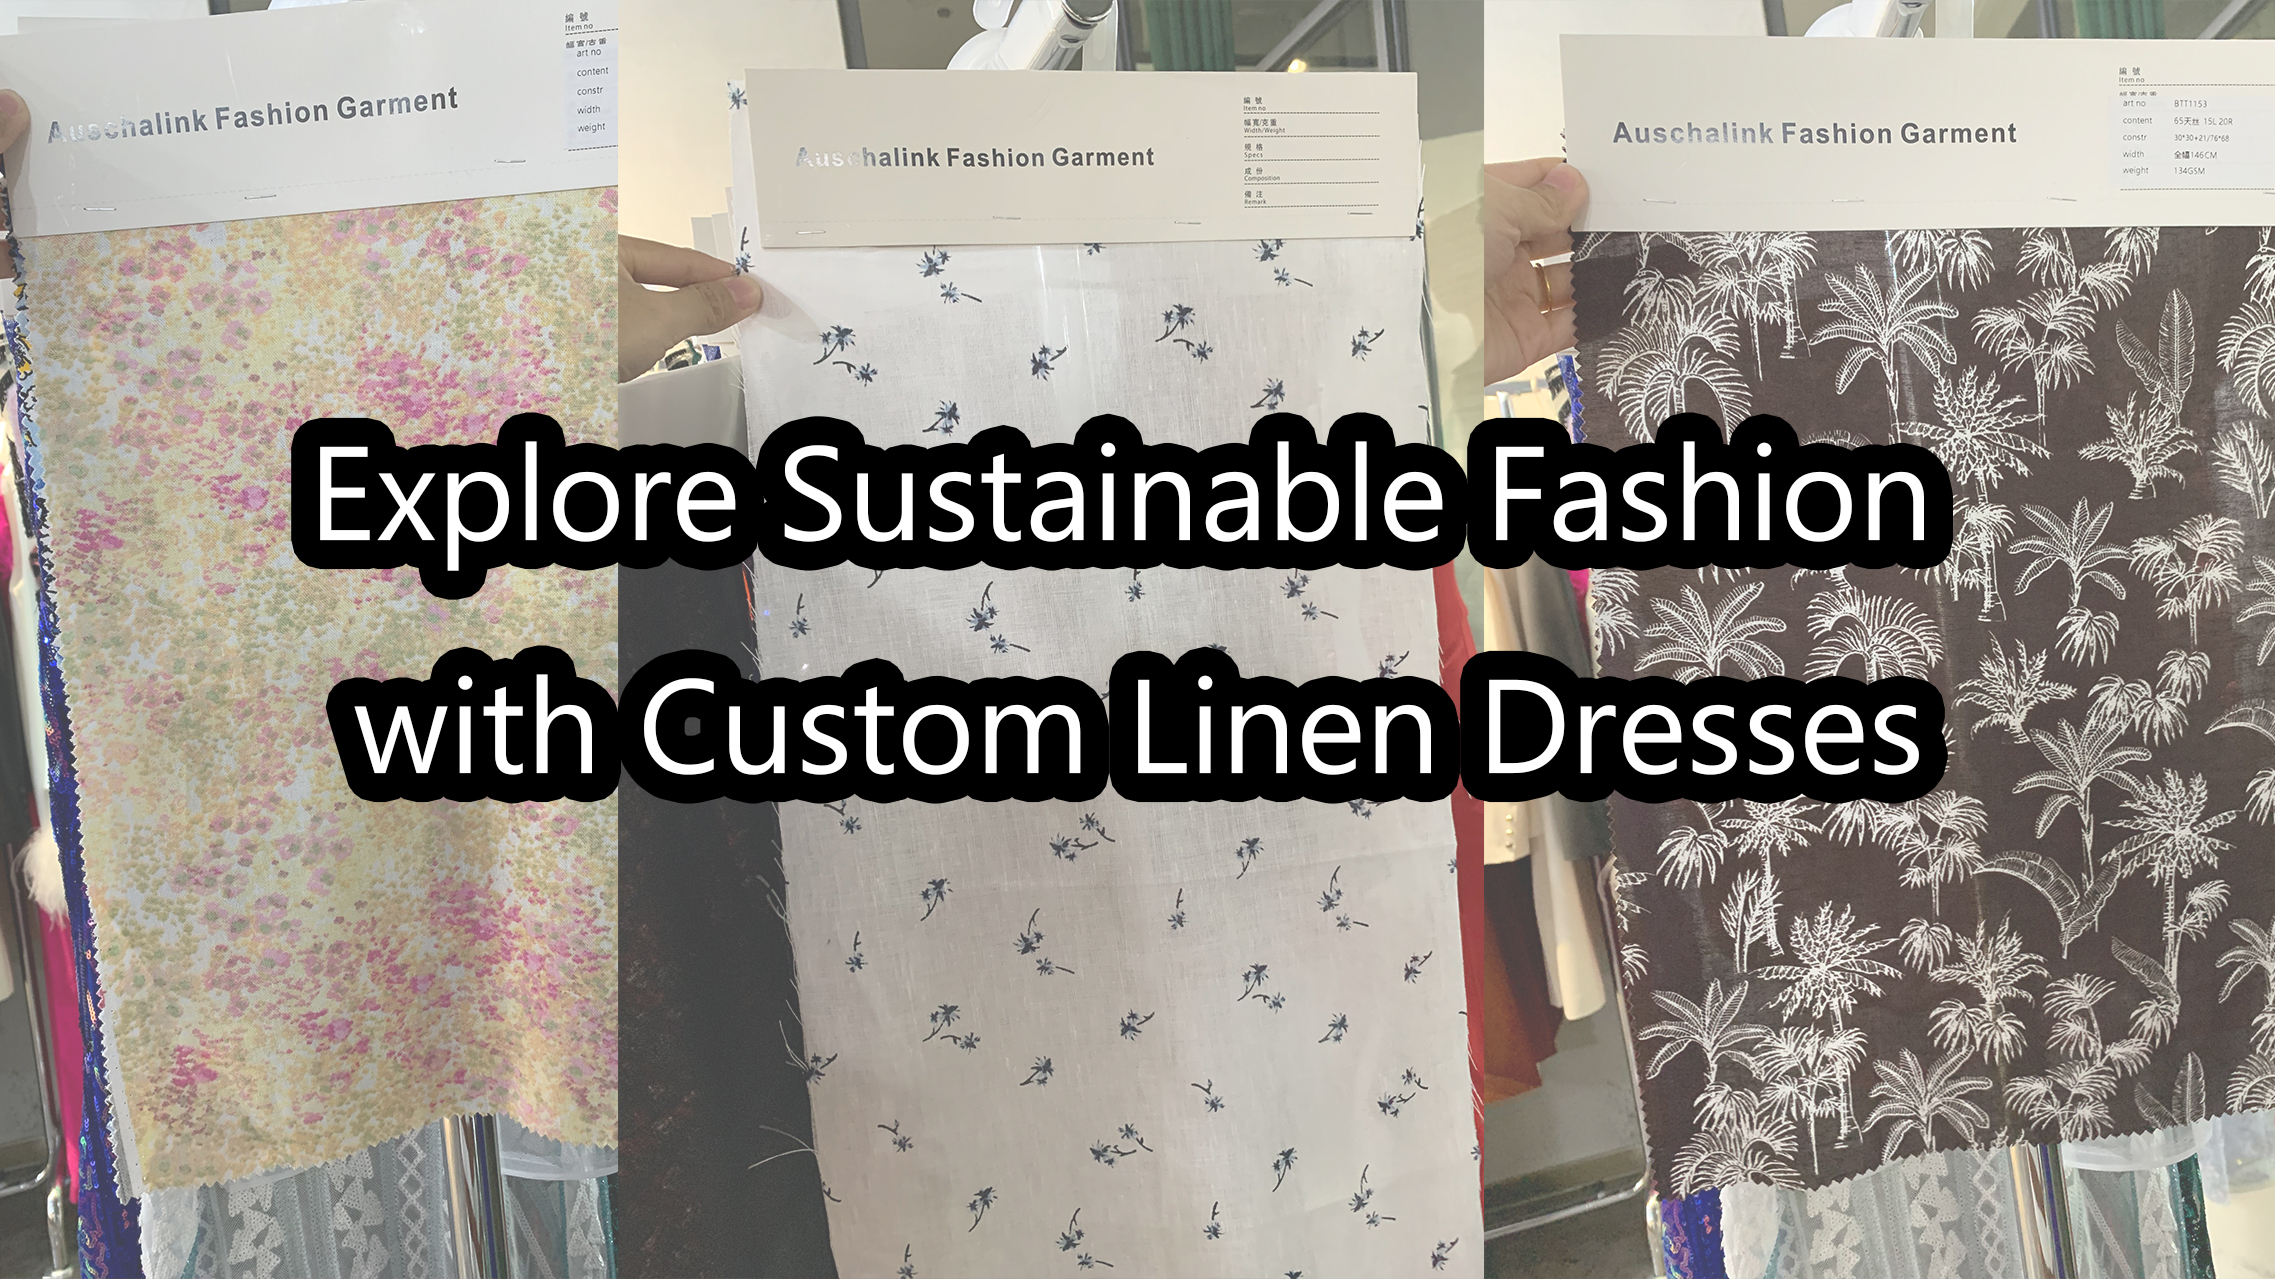 Explore Sustainable Fashion with Custom Linen Dresses